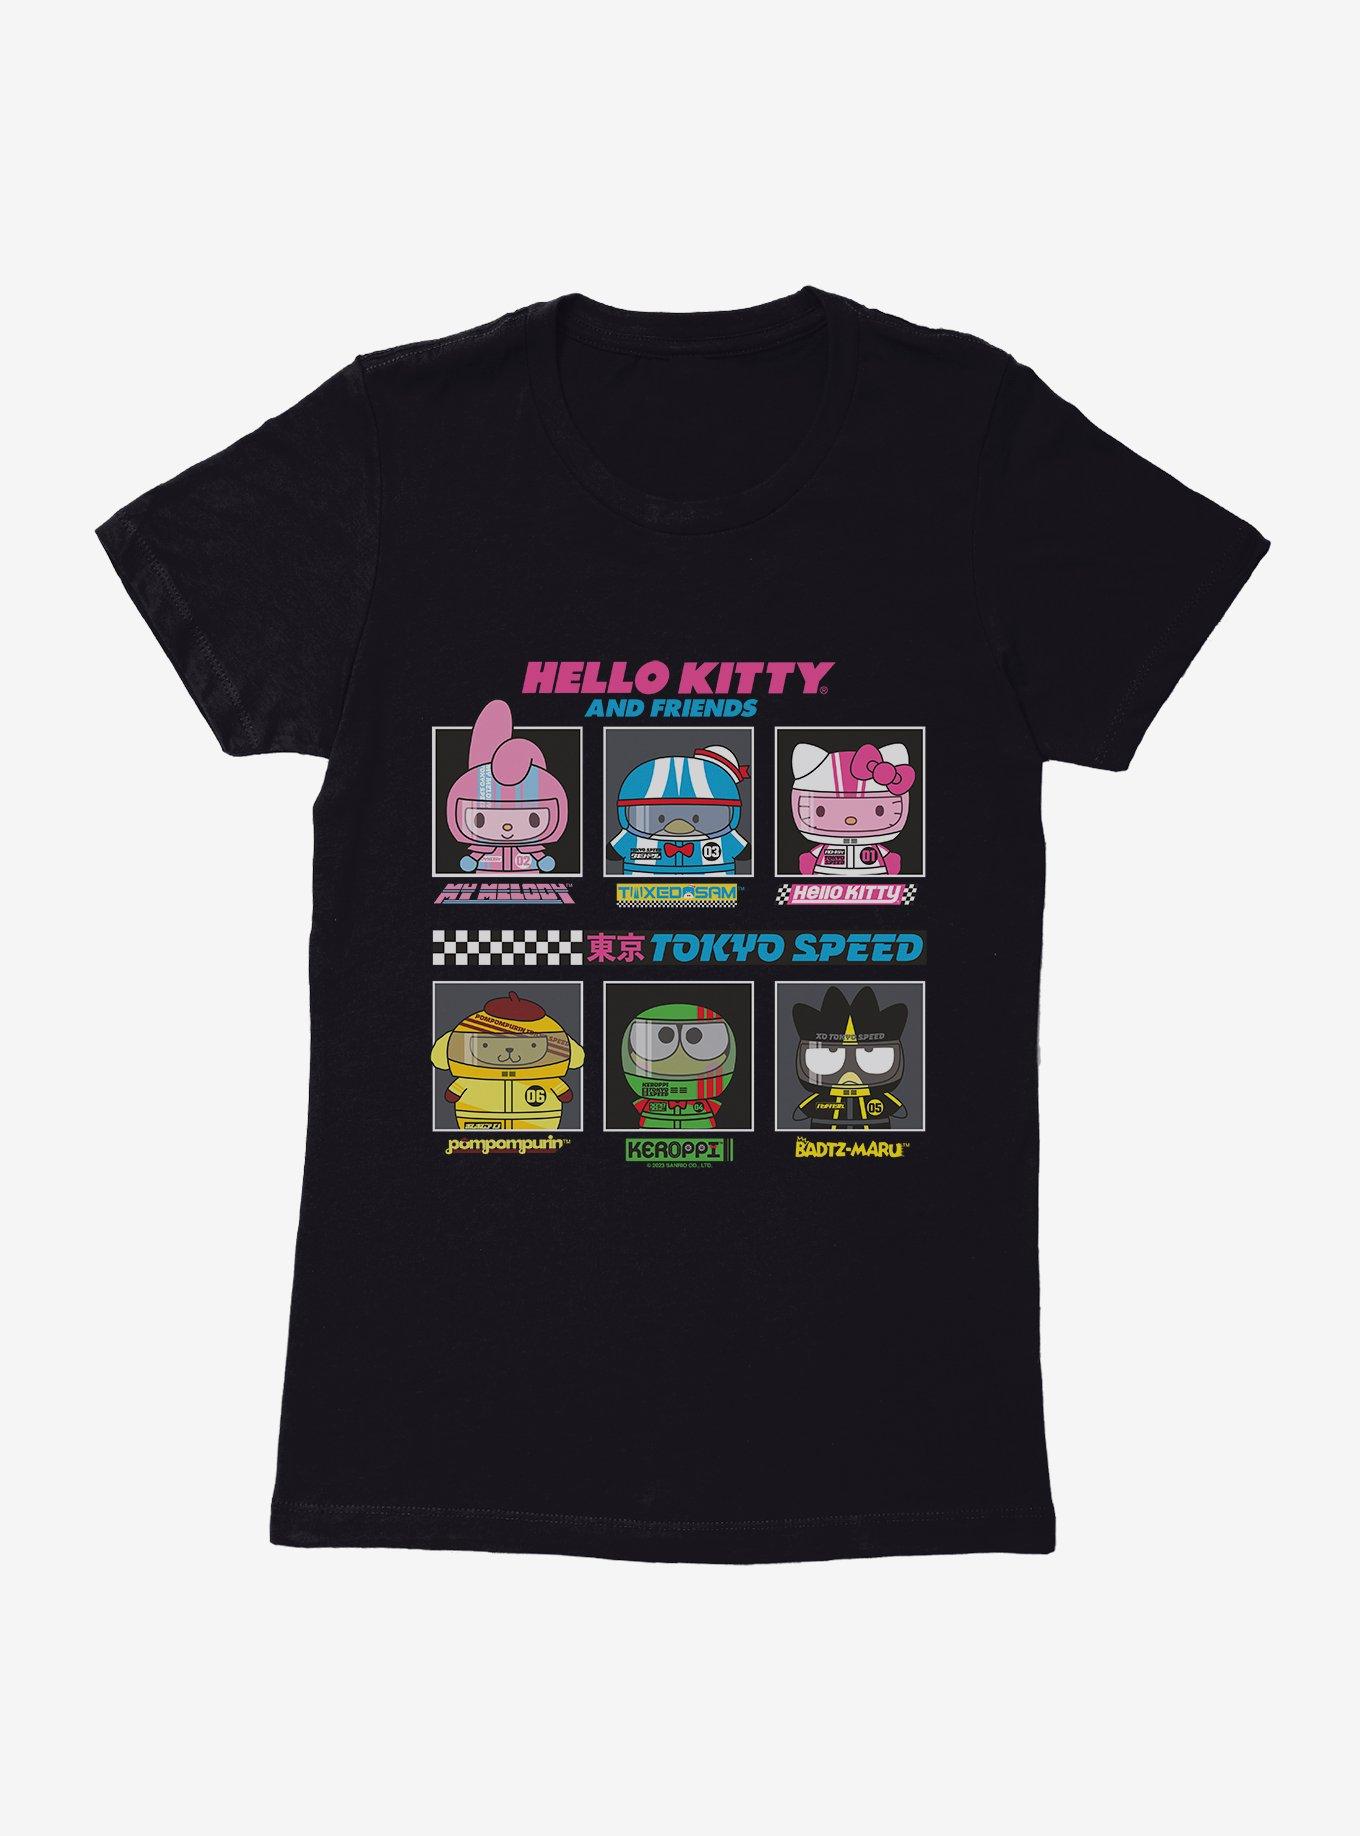 Hello Kitty And Friends Tokyo Speed Lineup Womens T-Shirt, BLACK, hi-res